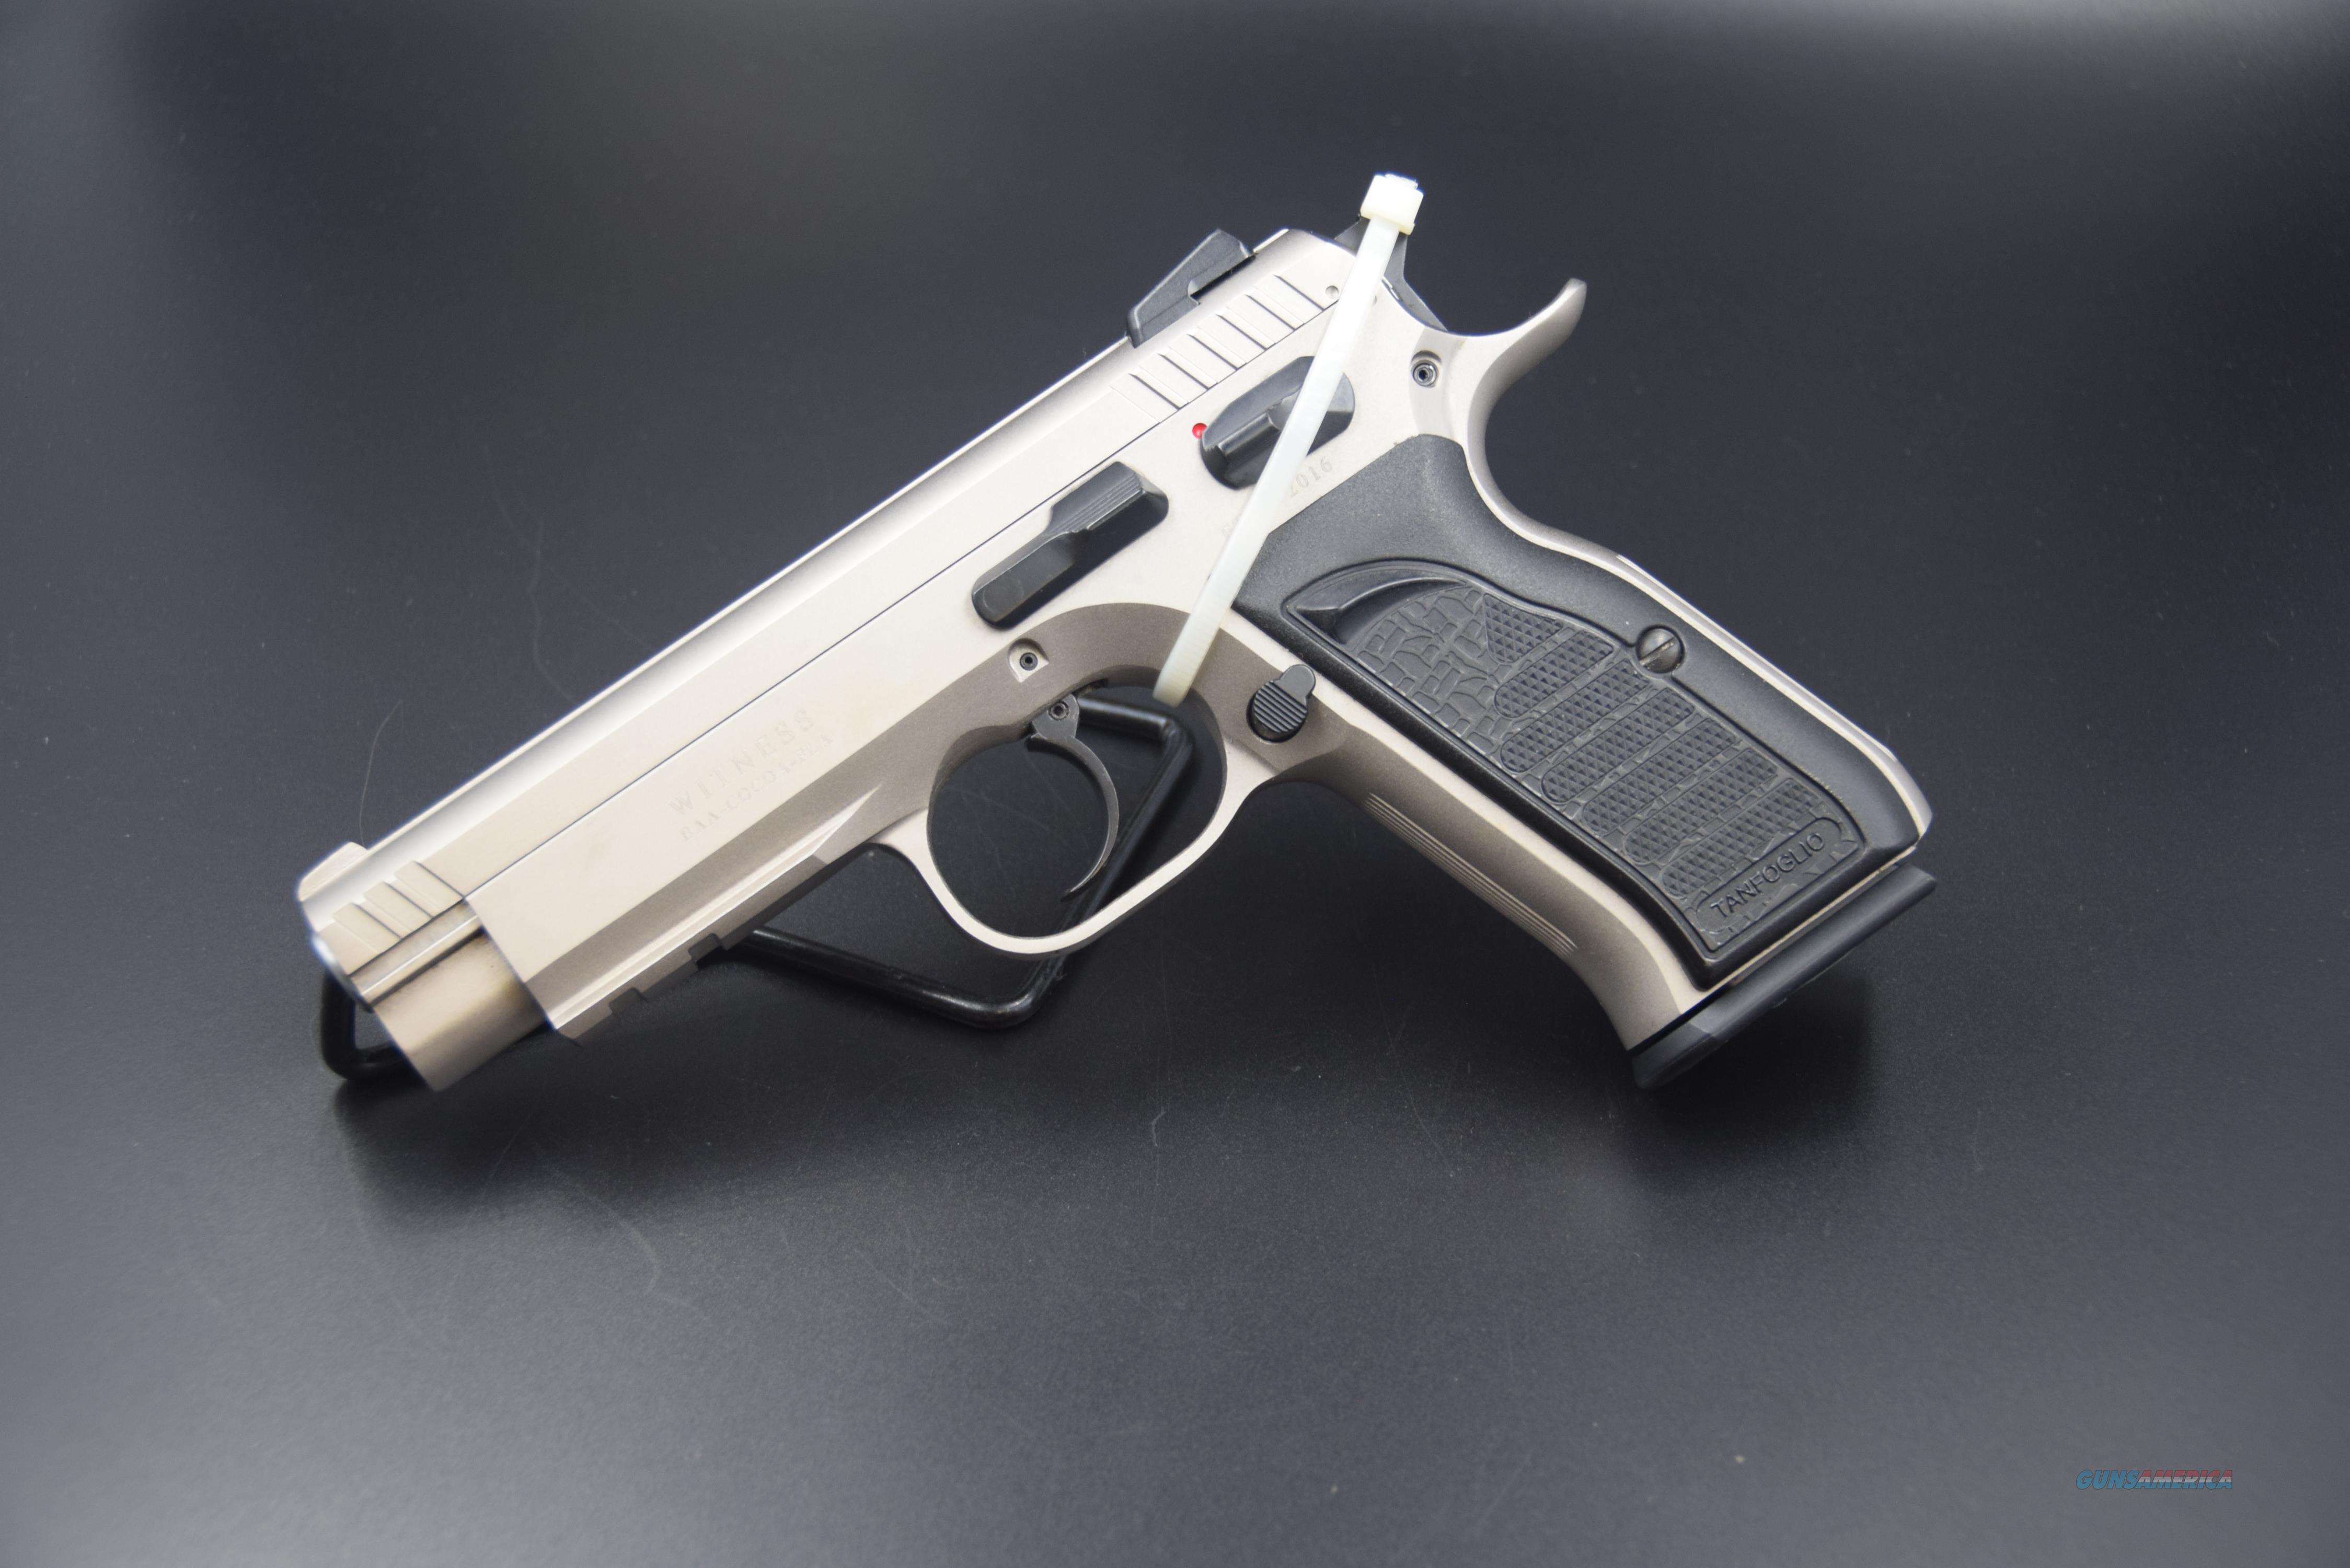 eaa witness compact 9mm review